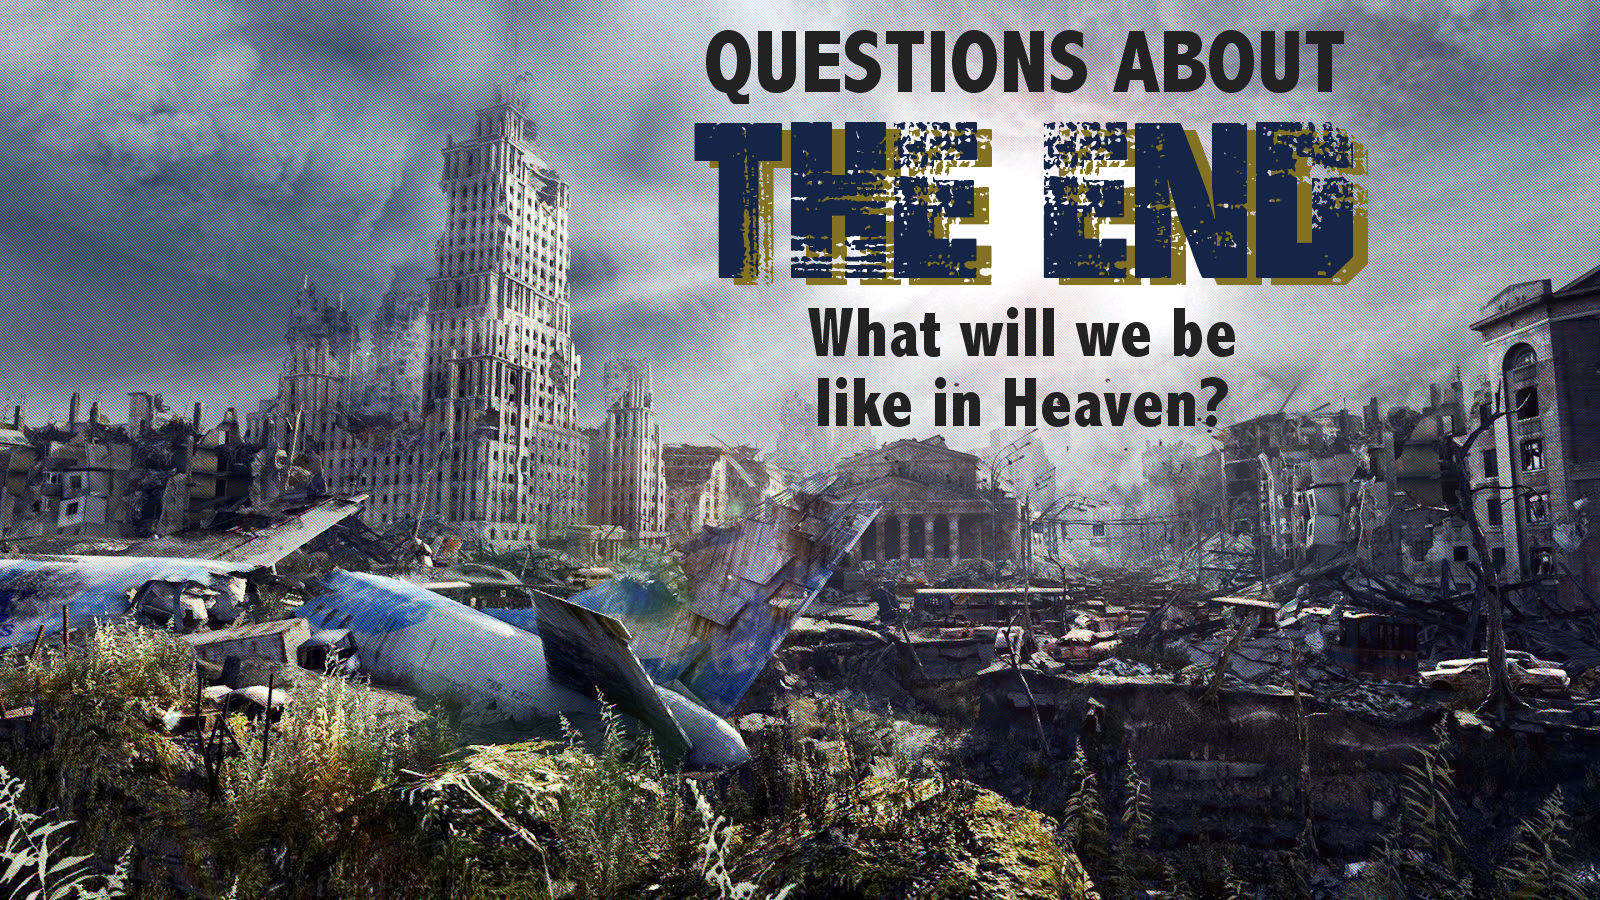 Questions about THE END - 